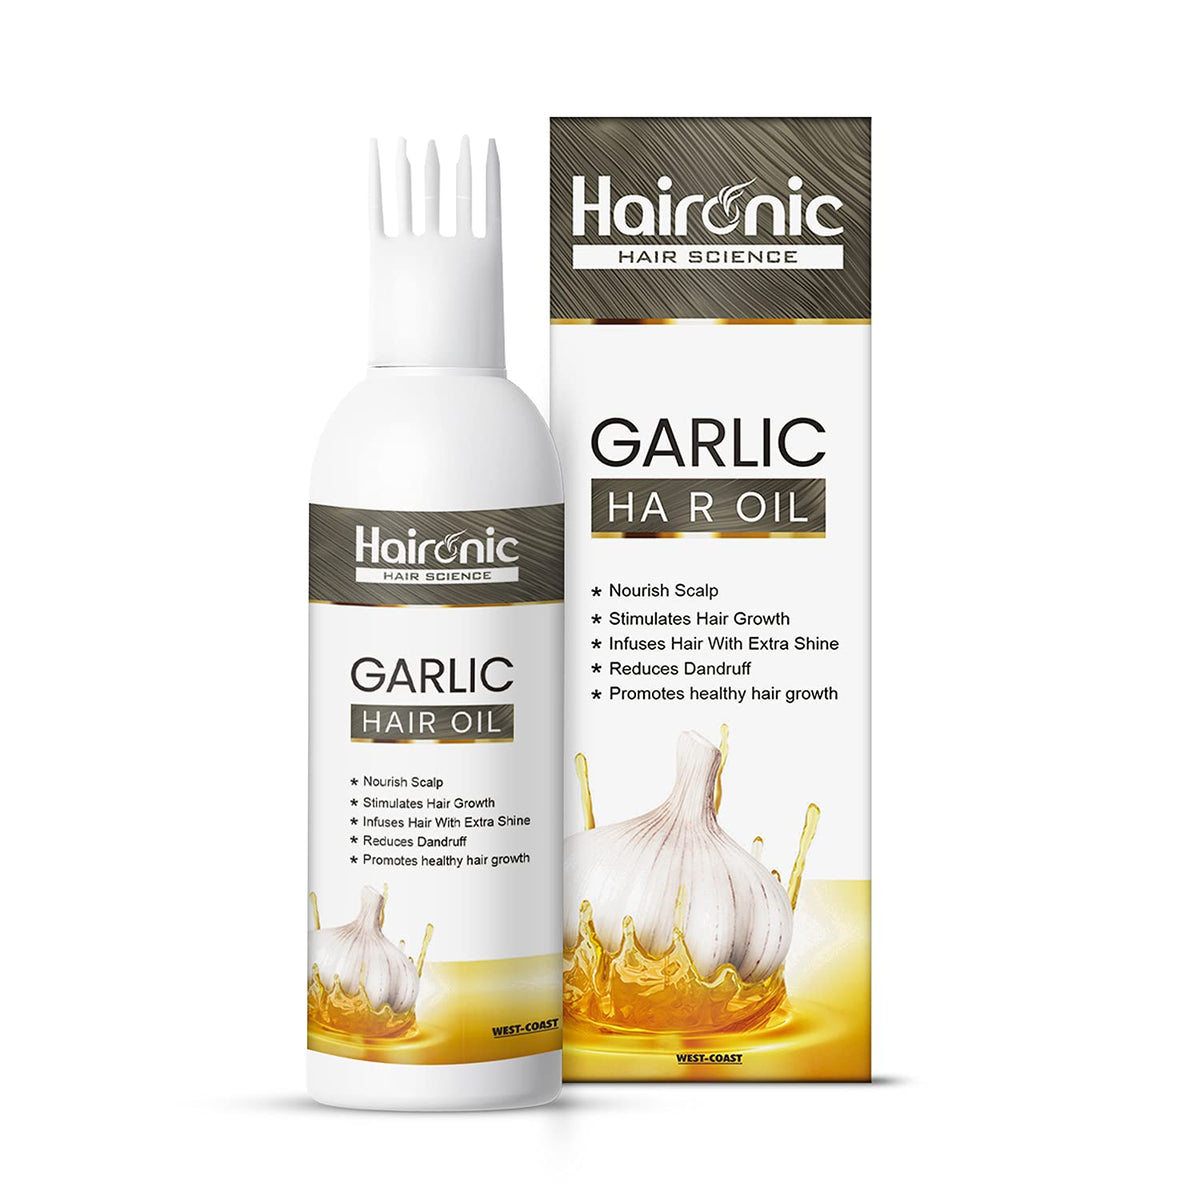 Haironic Hair Science Garlic Hair Oil for Control Dandruff, Control Hair Loss and 100% Pure & Natural – 100ml (Pack of 10)